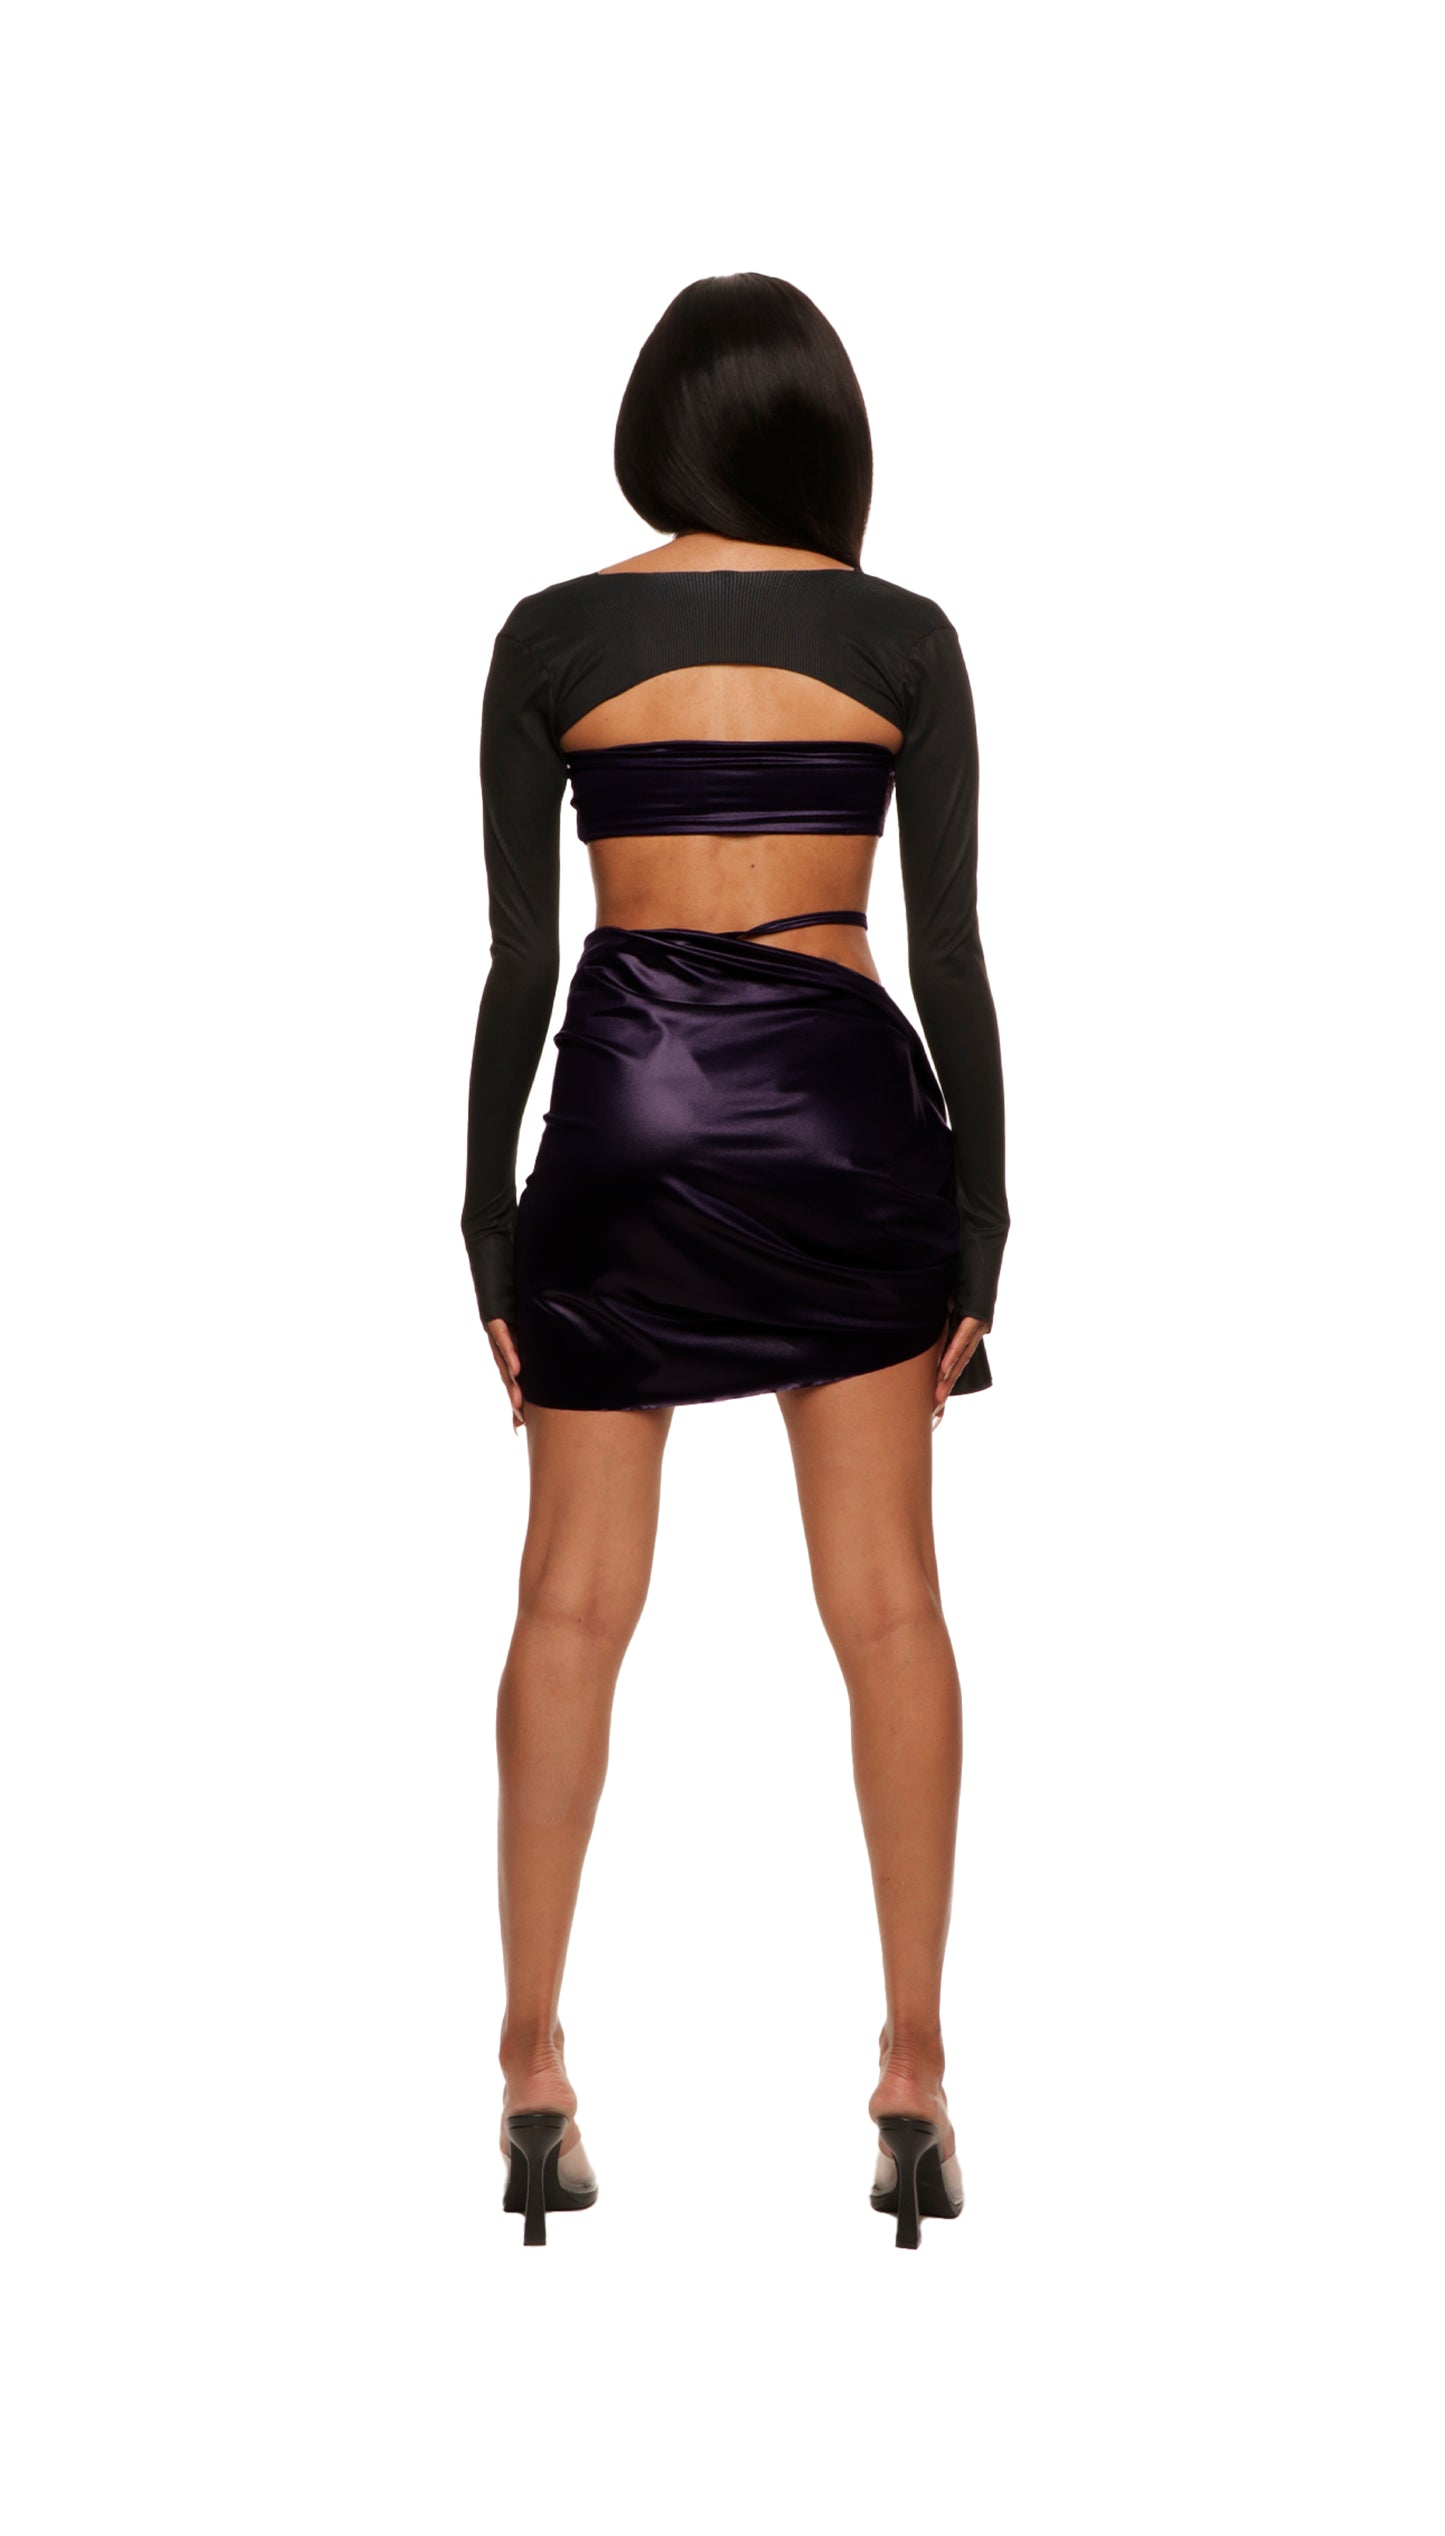 Woman who looks like Beyoncé or Aaliyah wears berry colored stretch cooling smooth nylon bikini top with adjustable clear straps for comfortability, paired with matching skirt and bikini bottom, back view.